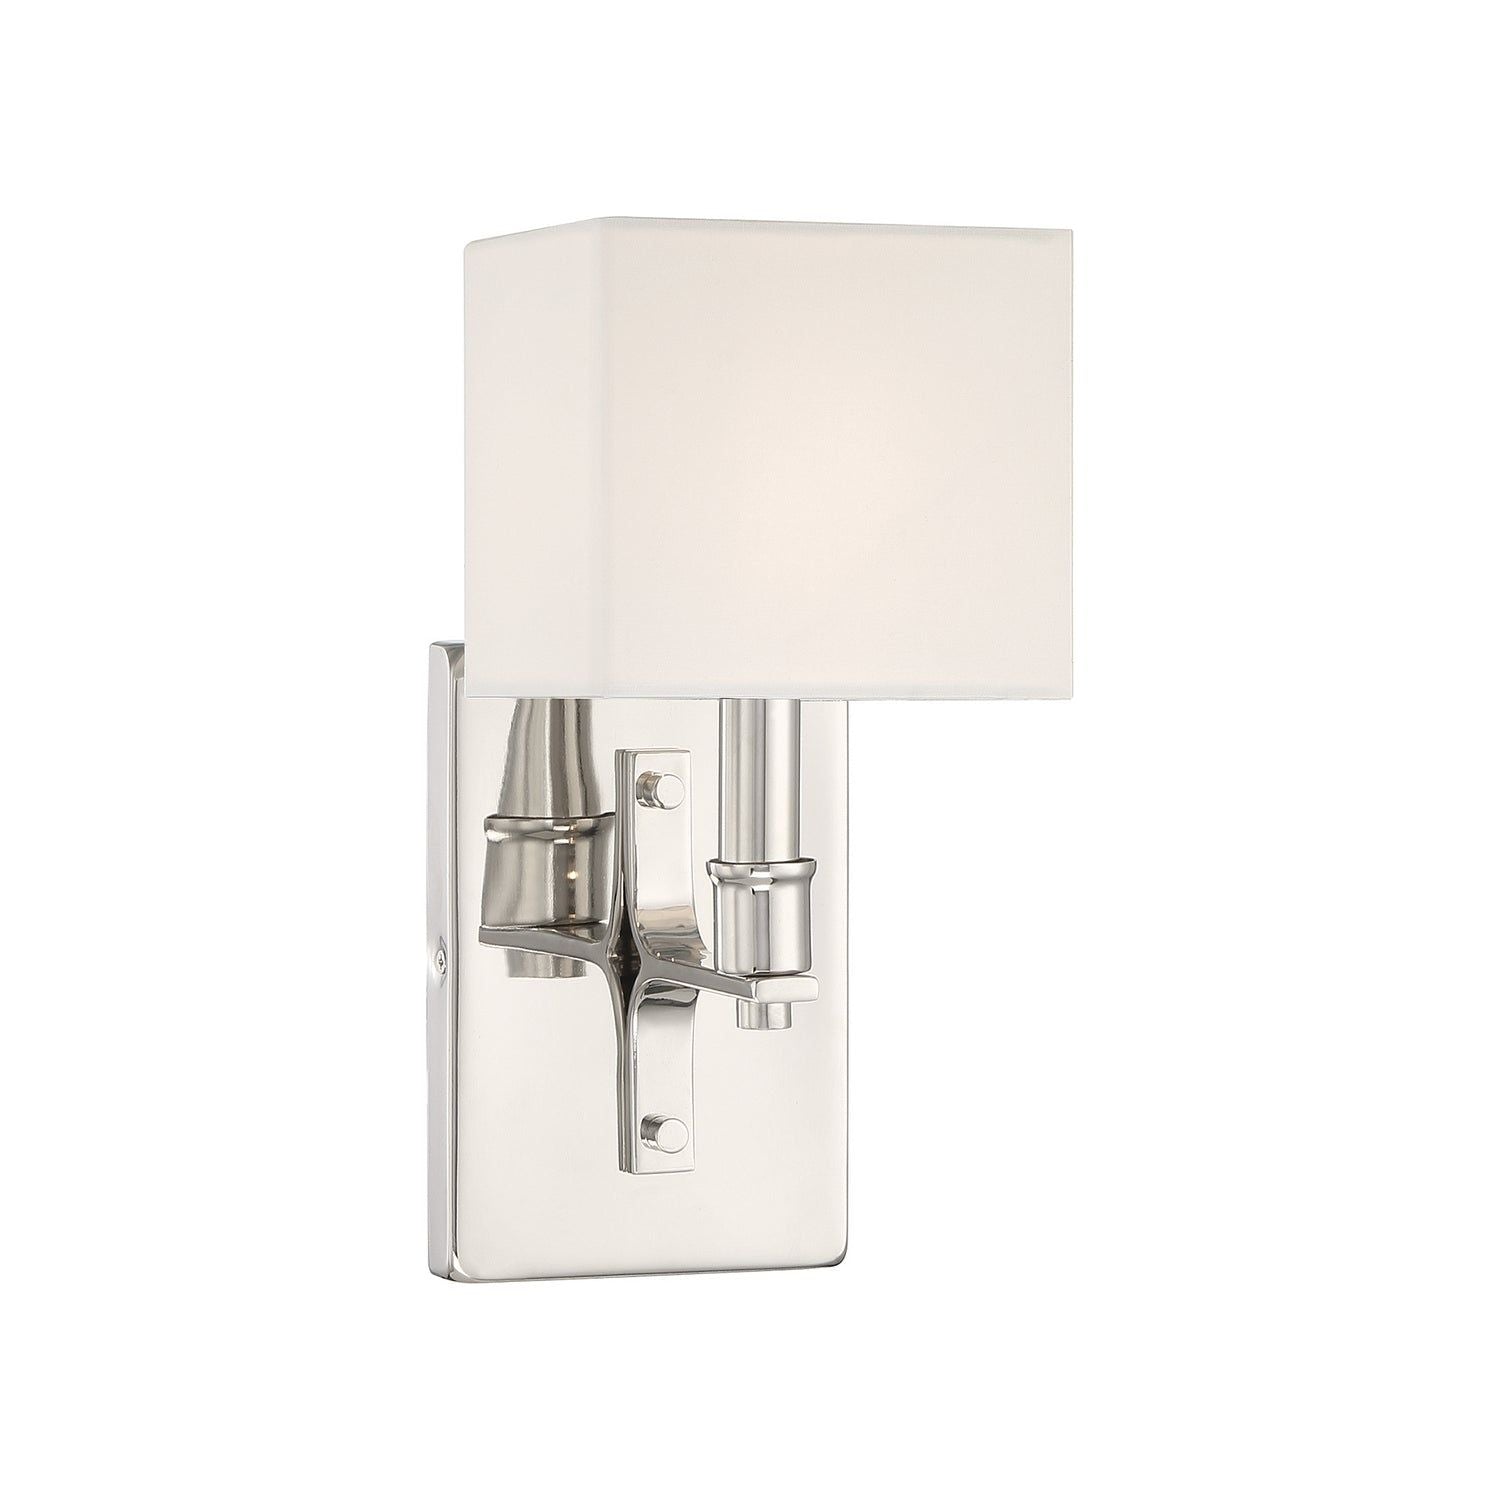 Lighting One E - V6-L9-8550-1-109 - One Light Wall Sconce - Collins - Polished Nickel